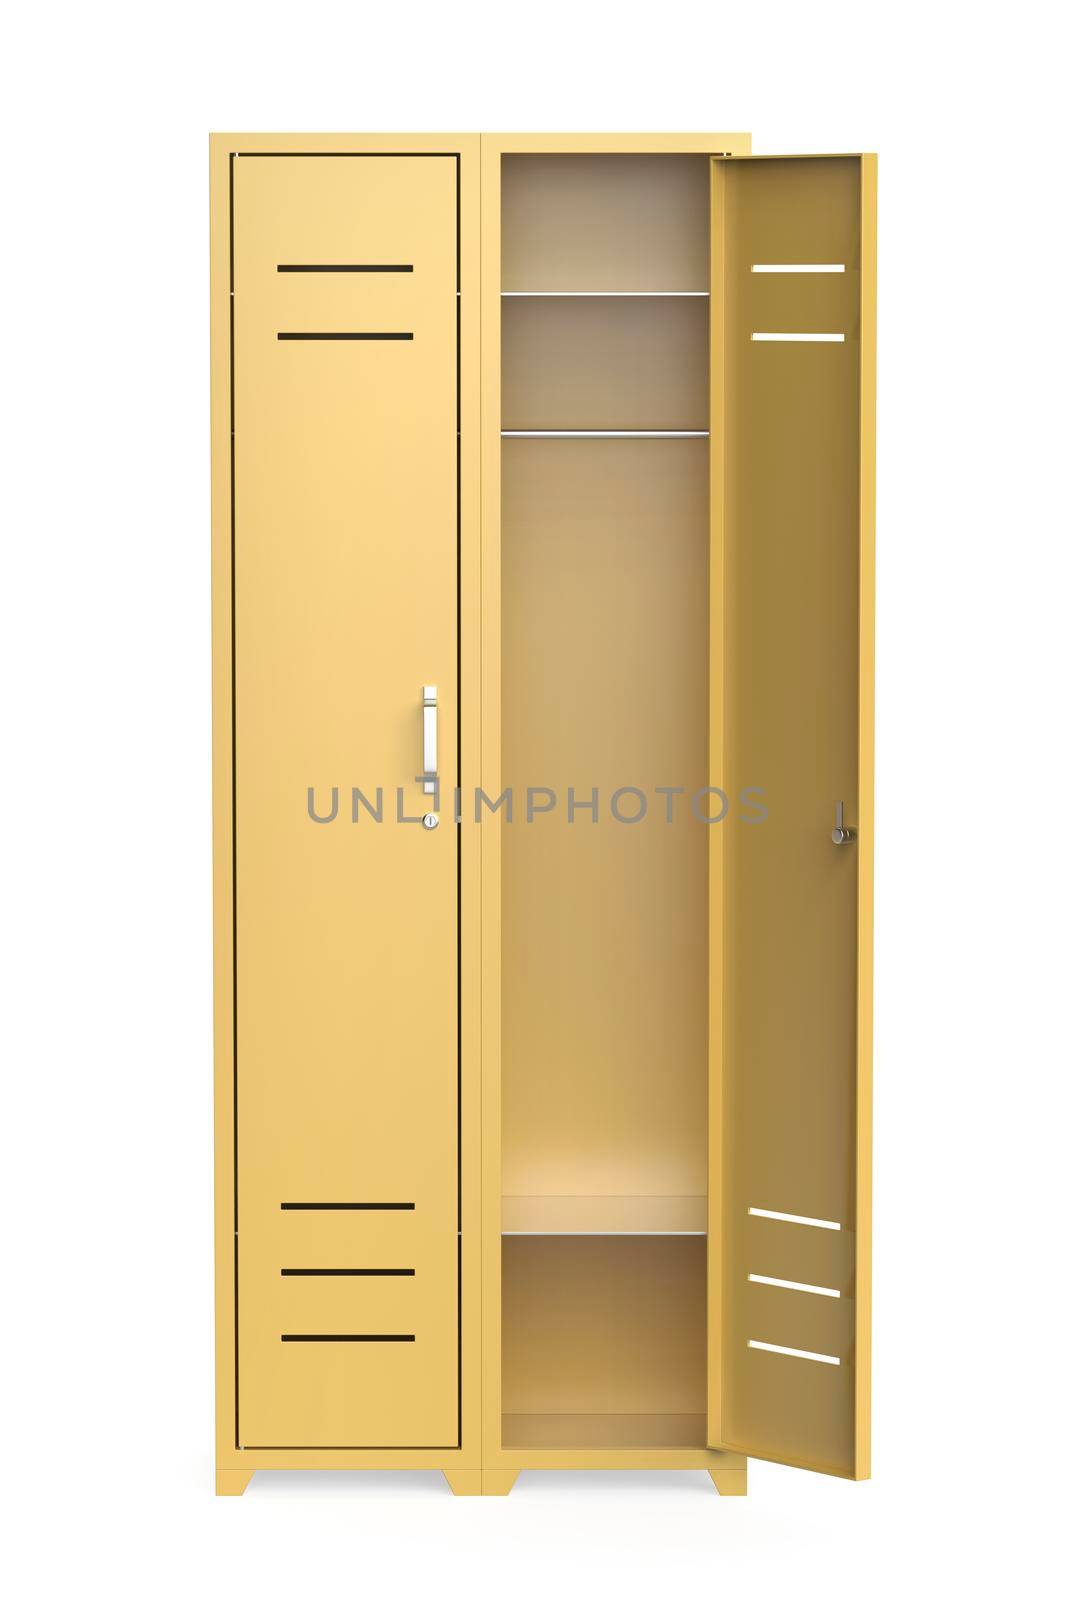 Yellow metal lockers by magraphics